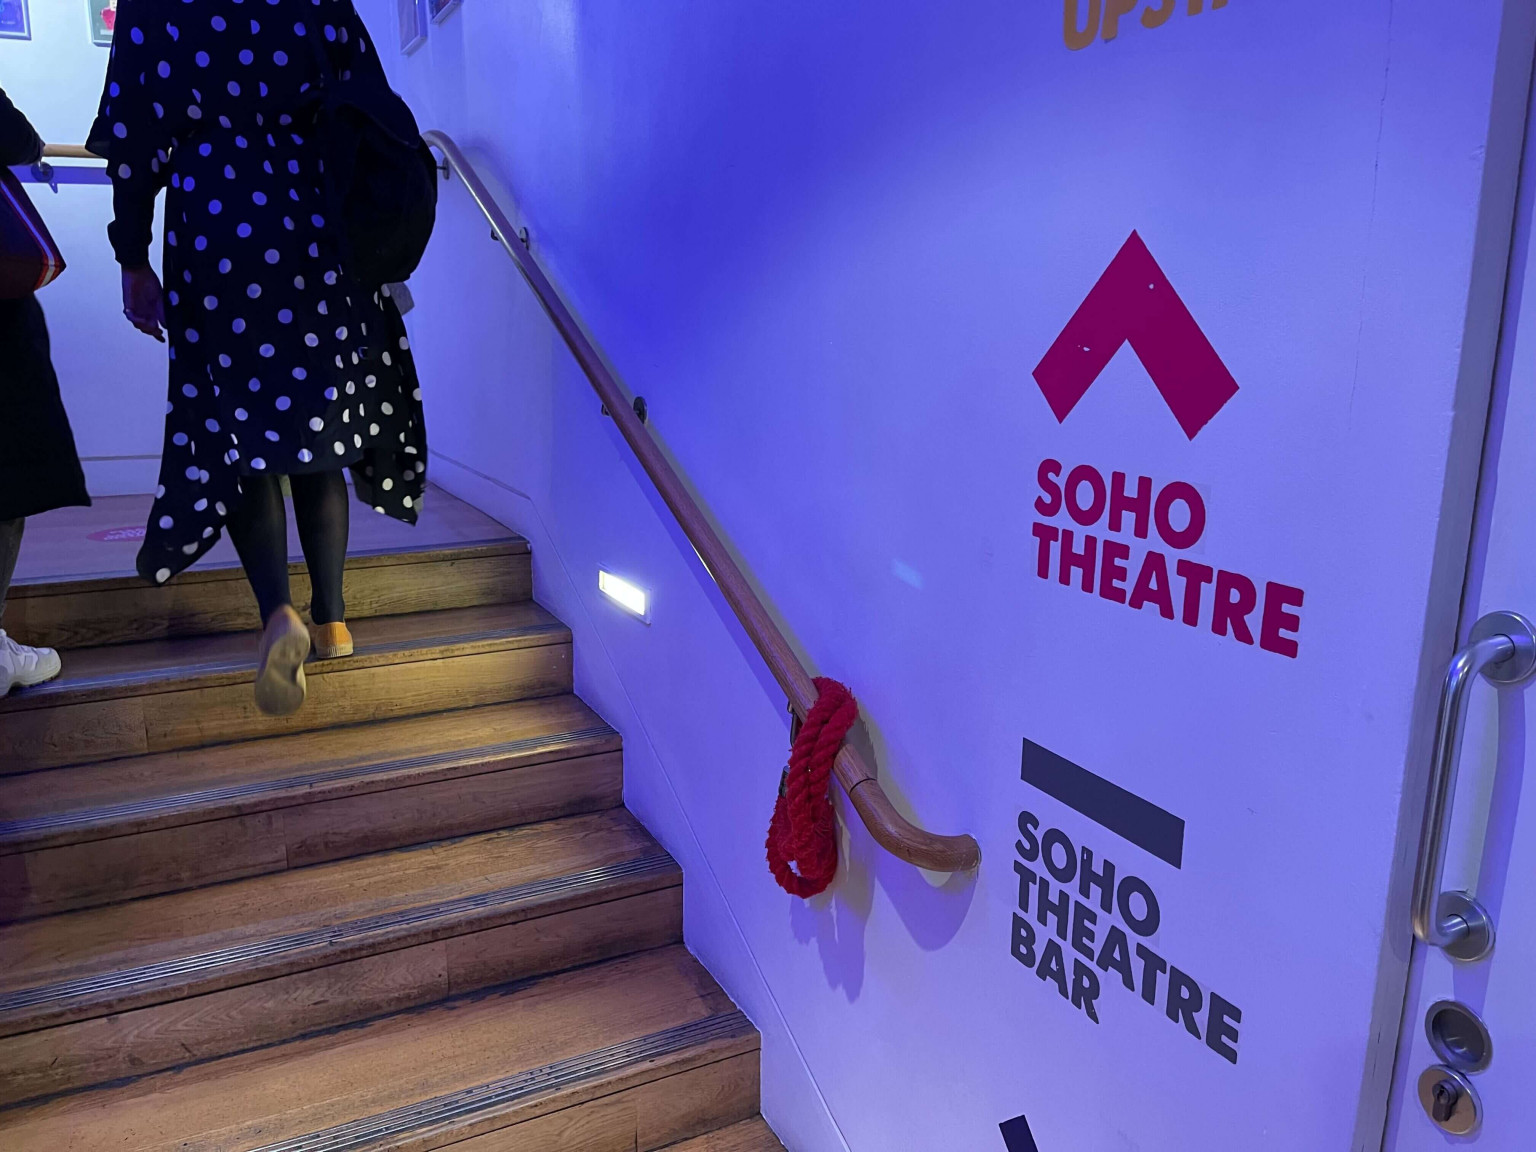 We head up the stairs of the Soho Theatre to find our seats